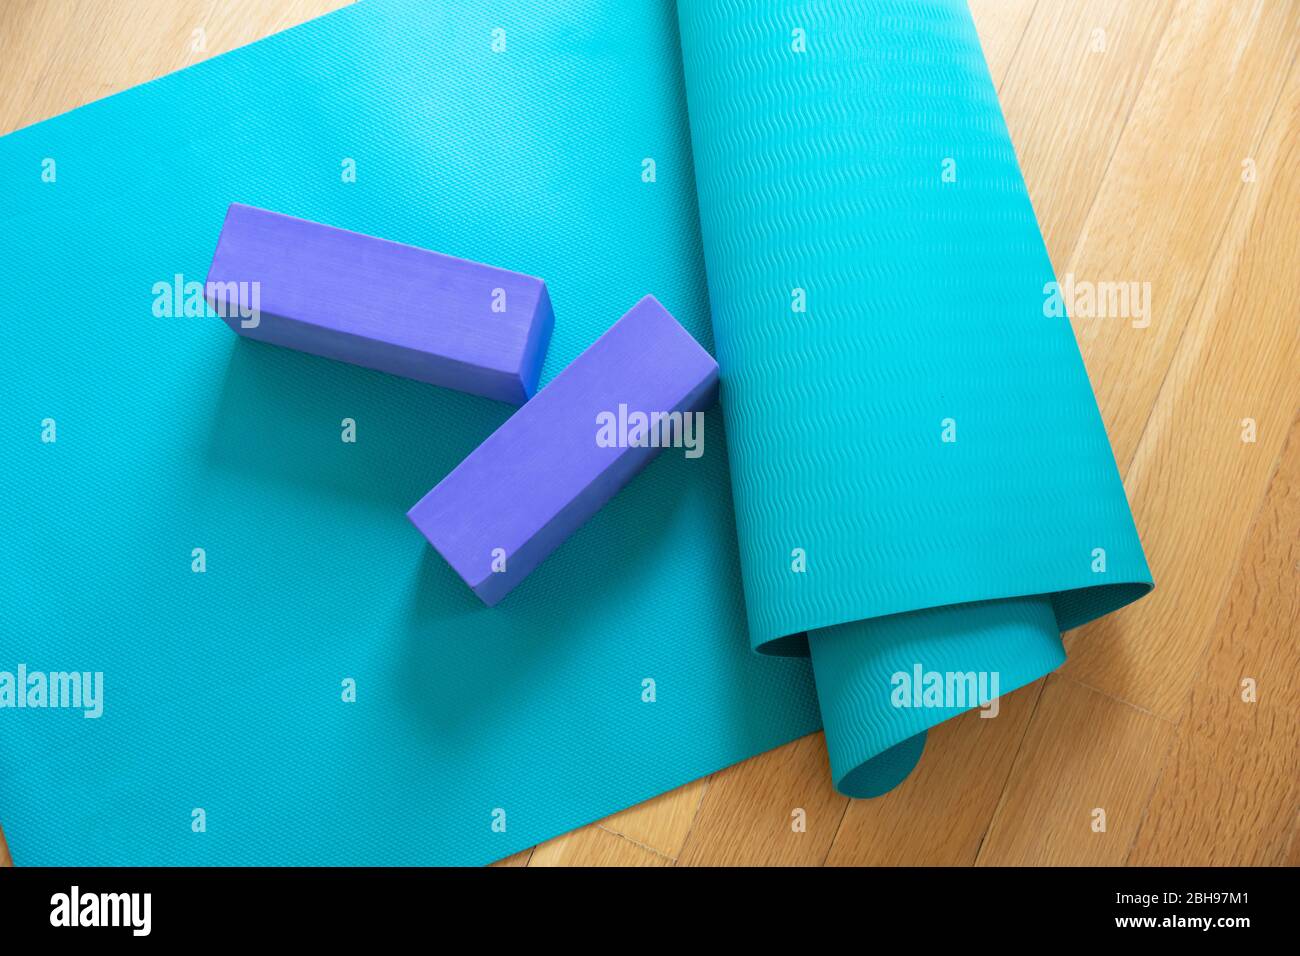 Yoga mat and exercise bricks on wooden floor. Pilates, yoga class, training at home and healthy lifestuyle concept Stock Photo